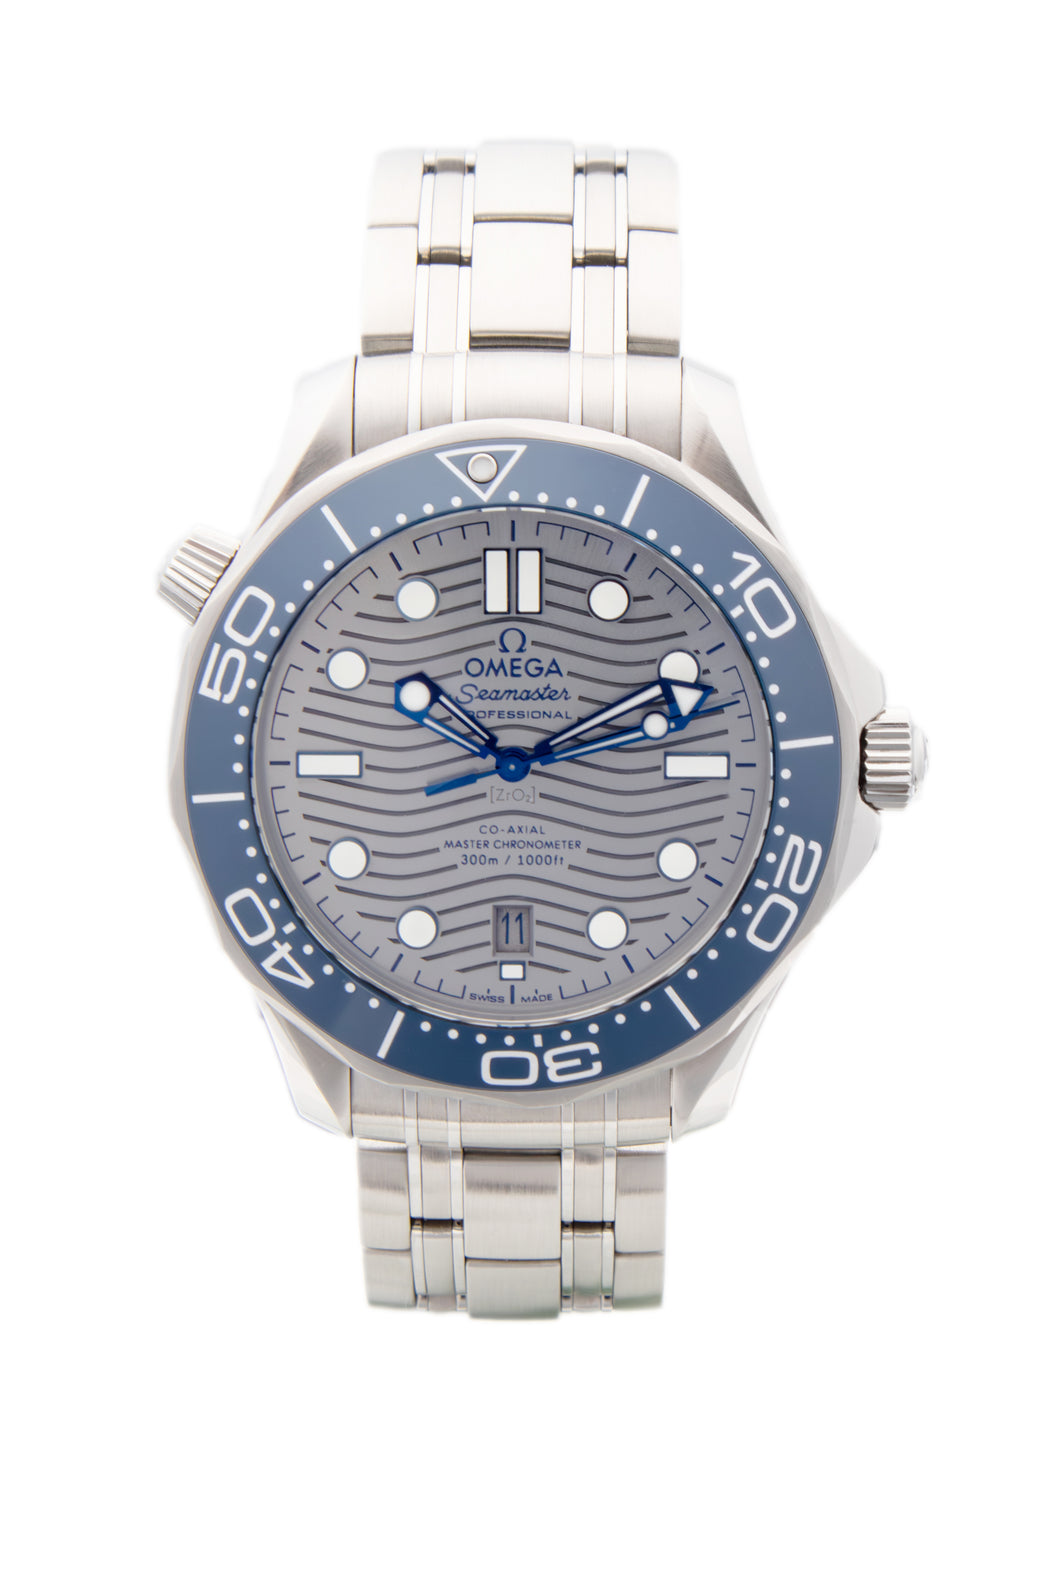 
42mm

Stainless Steel

Blue Dial
Water Resistance 300m
Sapphire Cr...